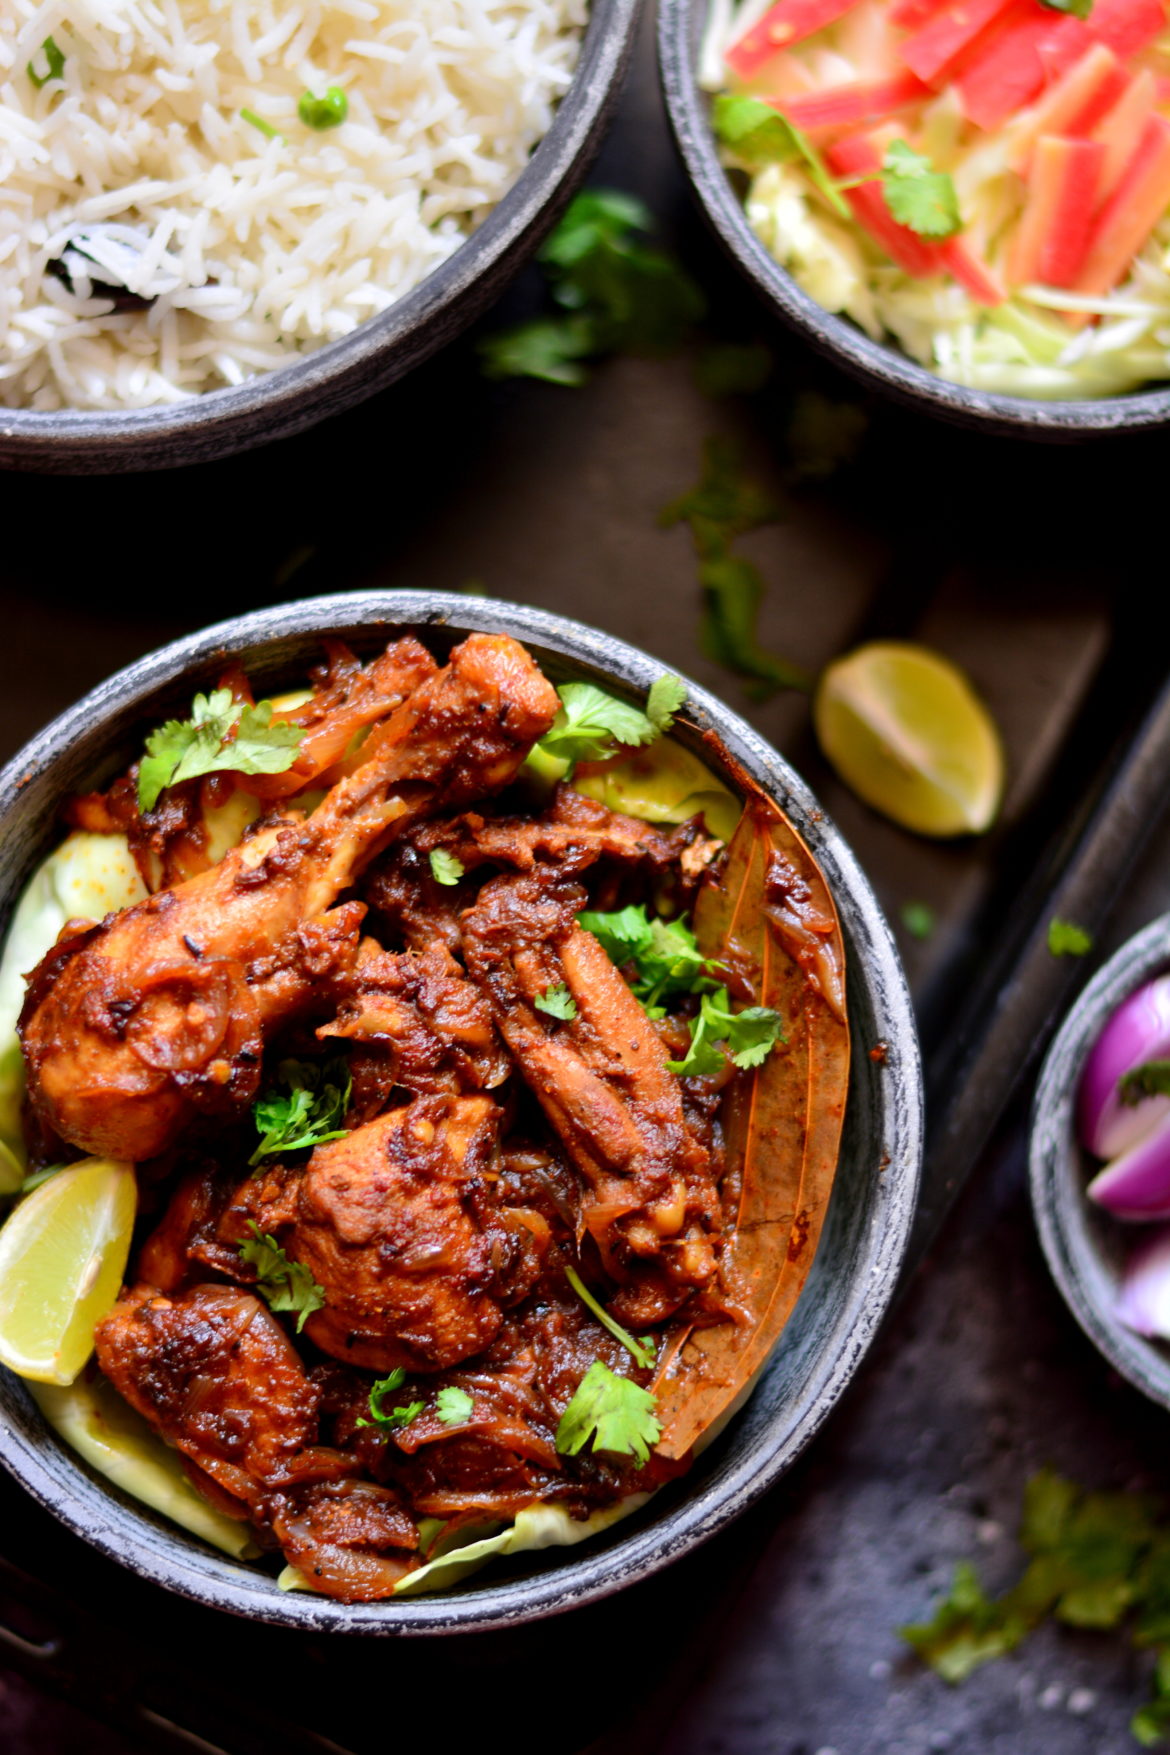 Bhuna Murgh - Dry Chicken Curry Smeared In Tomato Base With Spices.